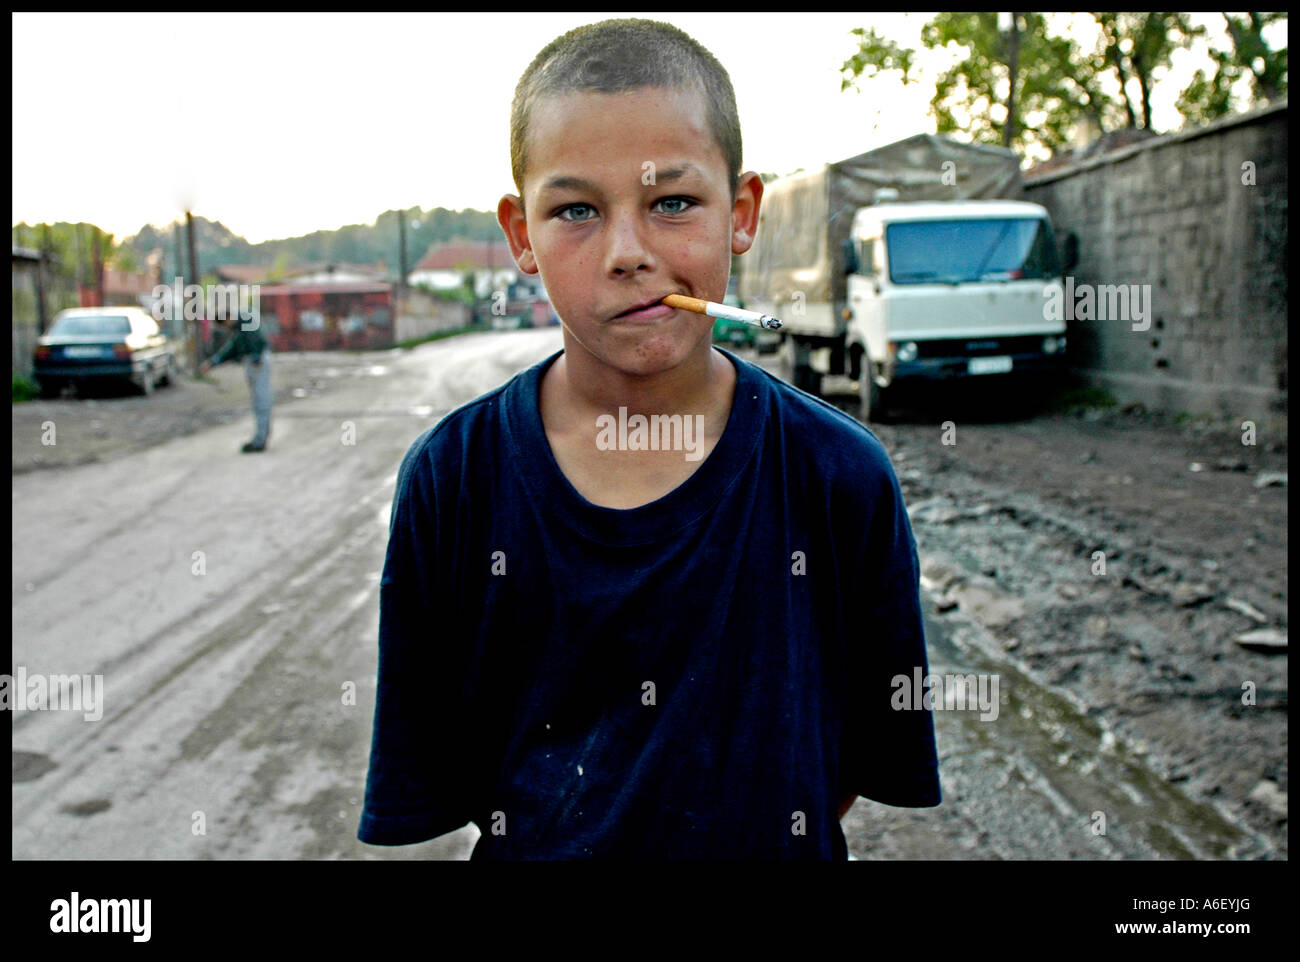 Gypsy child from Nis ghetto Stock Photo